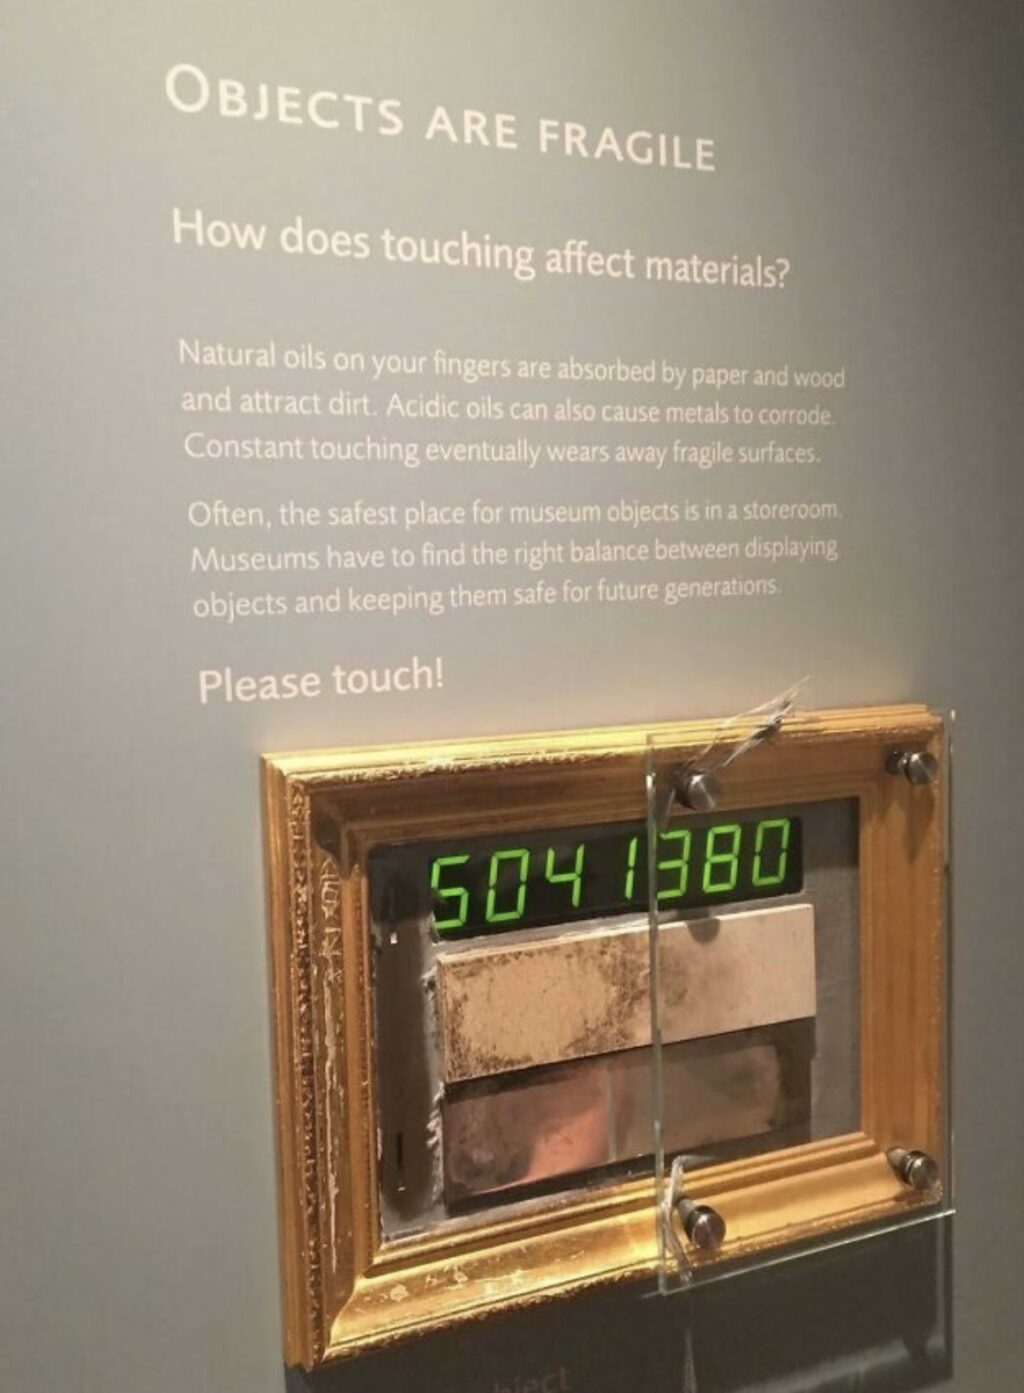 you from map at the aurora museum - Objects Are Fragile How does touching affect materials? Natural oils on your fingers are absorbed by paper and wood and attract dirt. Acidic oils can also cause metals to corrode. Constant touching eventually wears away